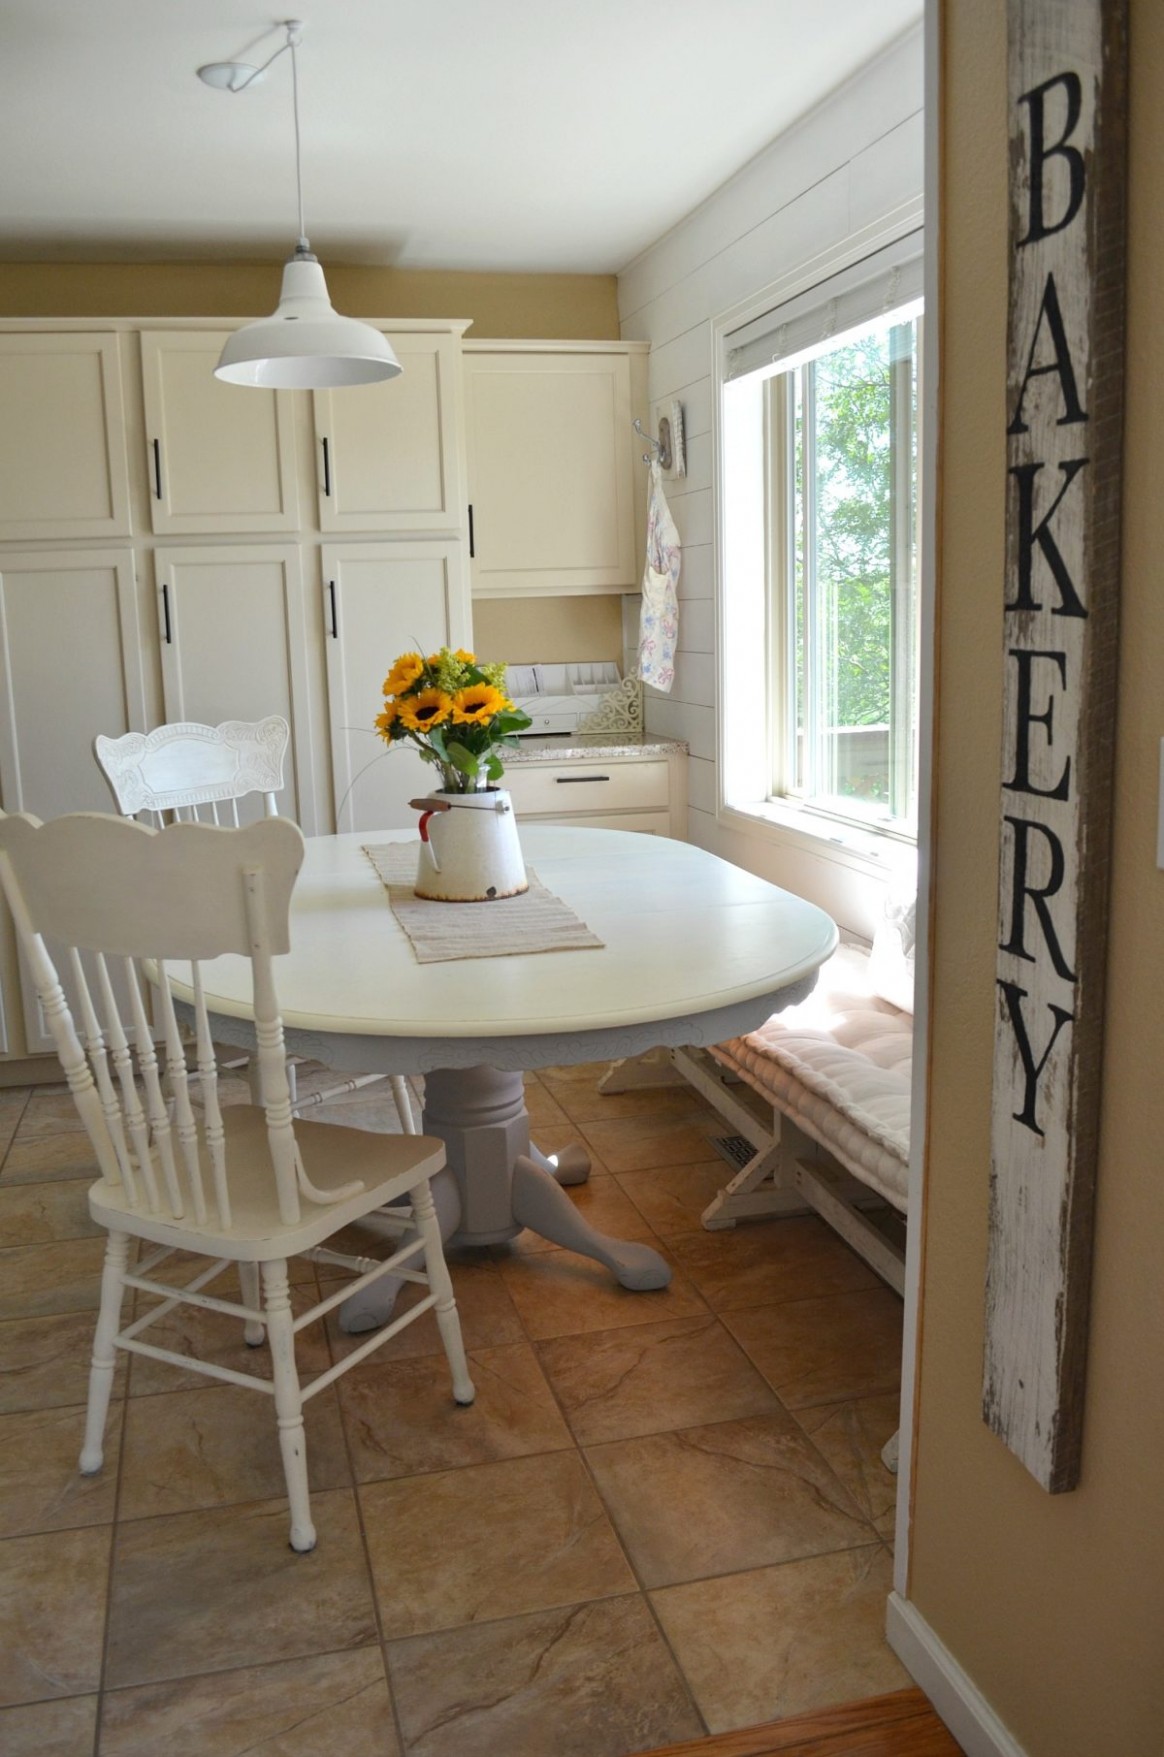 Diy Projects Chalk Paint Dining Table Makeover | Sarah Joy Blog How To Chalk Paint Wood Table